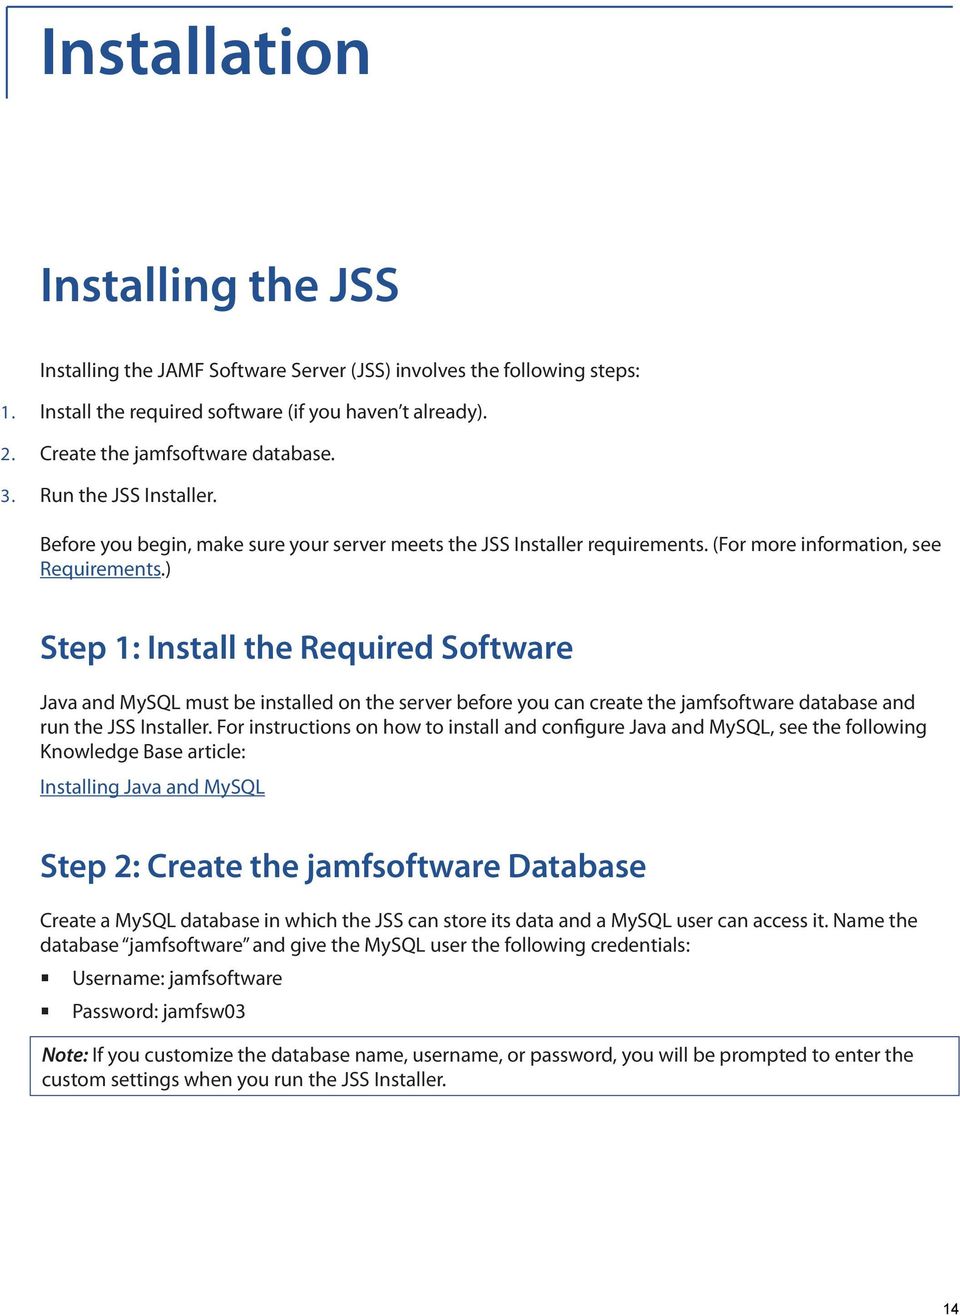 ) Step 1: Install the Required Software Java and MySQL must be installed on the server before you can create the jamfsoftware database and run the JSS Installer.